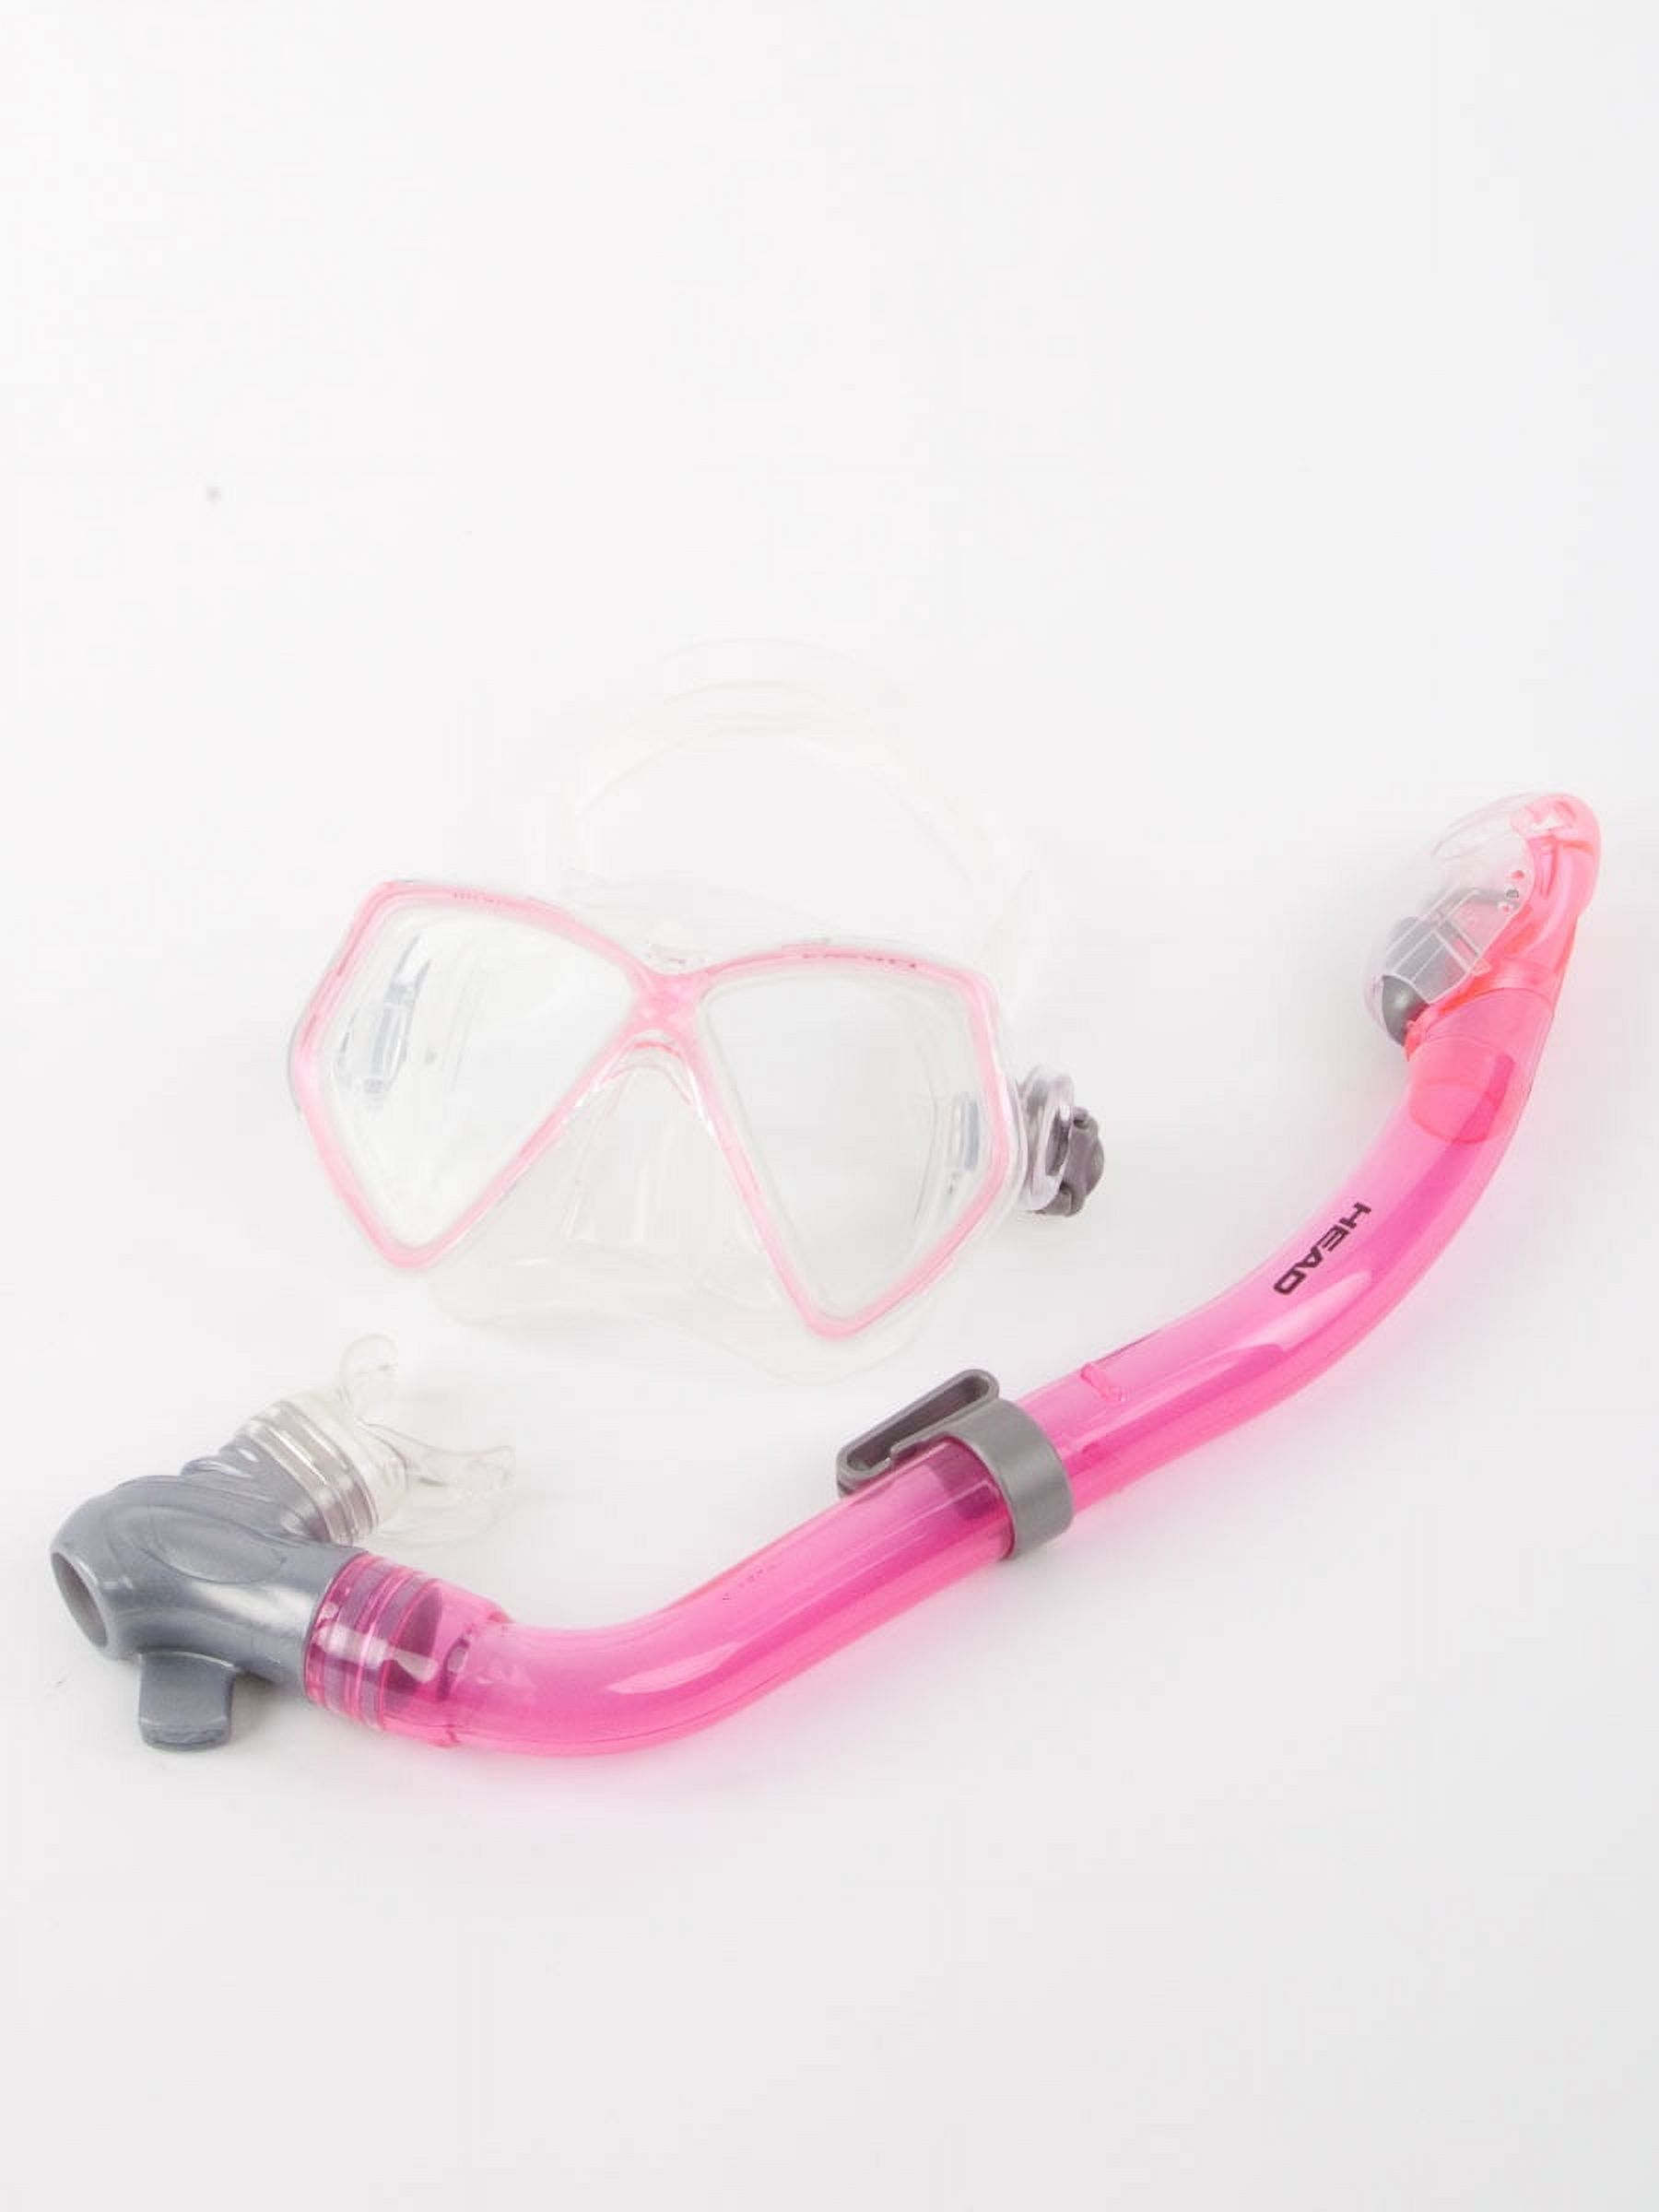 Mares Head Pirate Junior Mask - Snorkel Combo - Pink - image 2 of 2